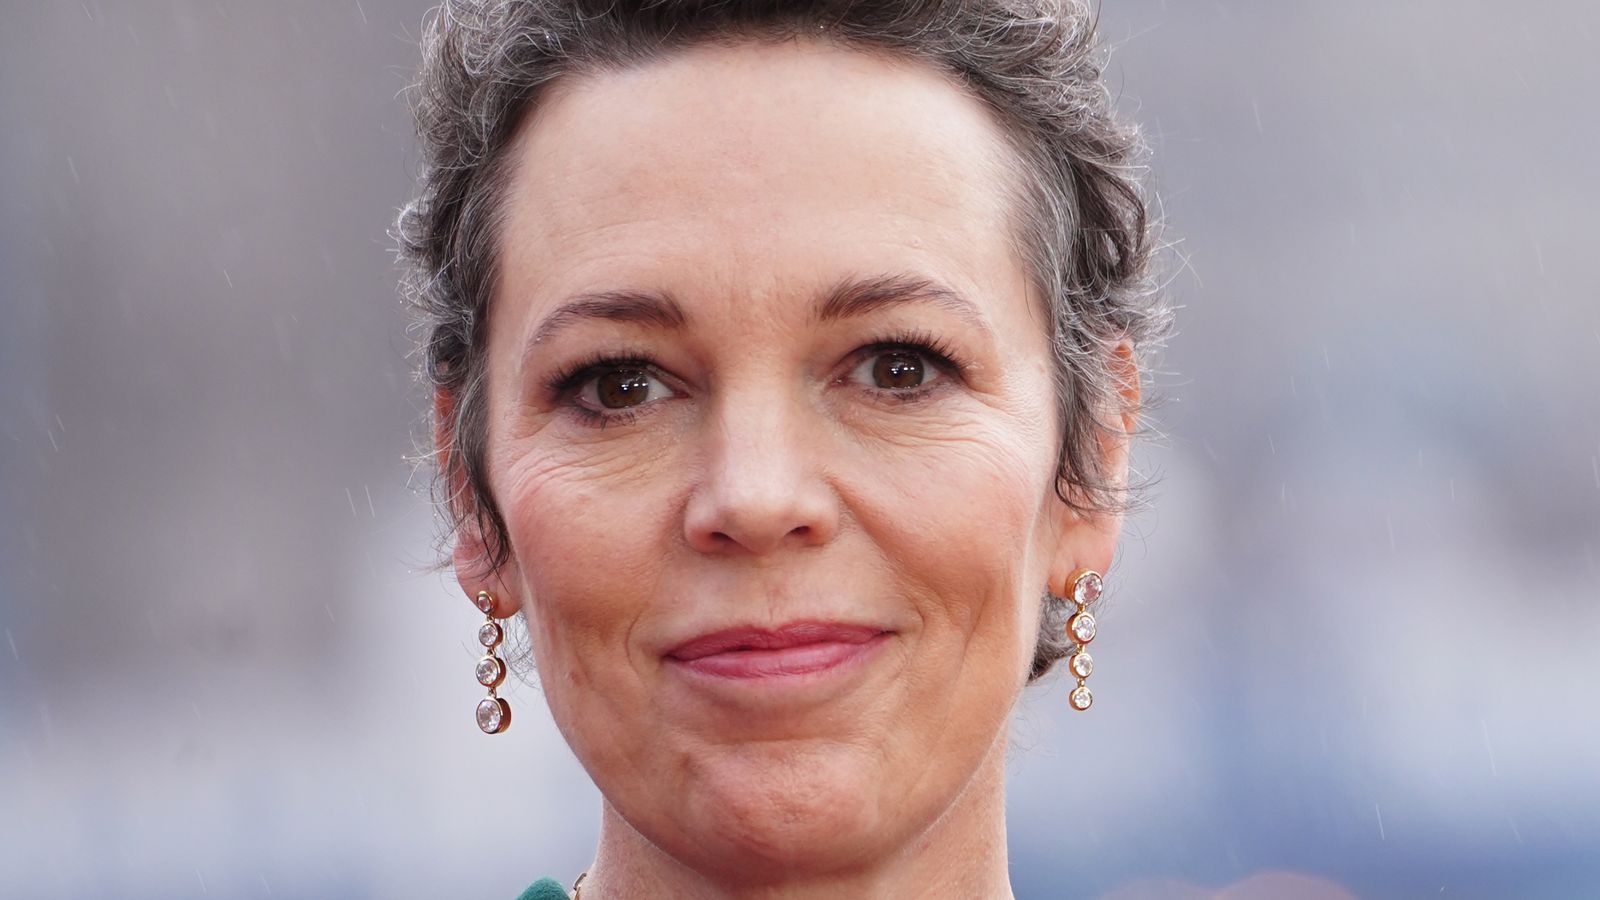 Olivia Colman: I'd be paid more if I was Oliver, says actress - as she hits out at gender pay gap